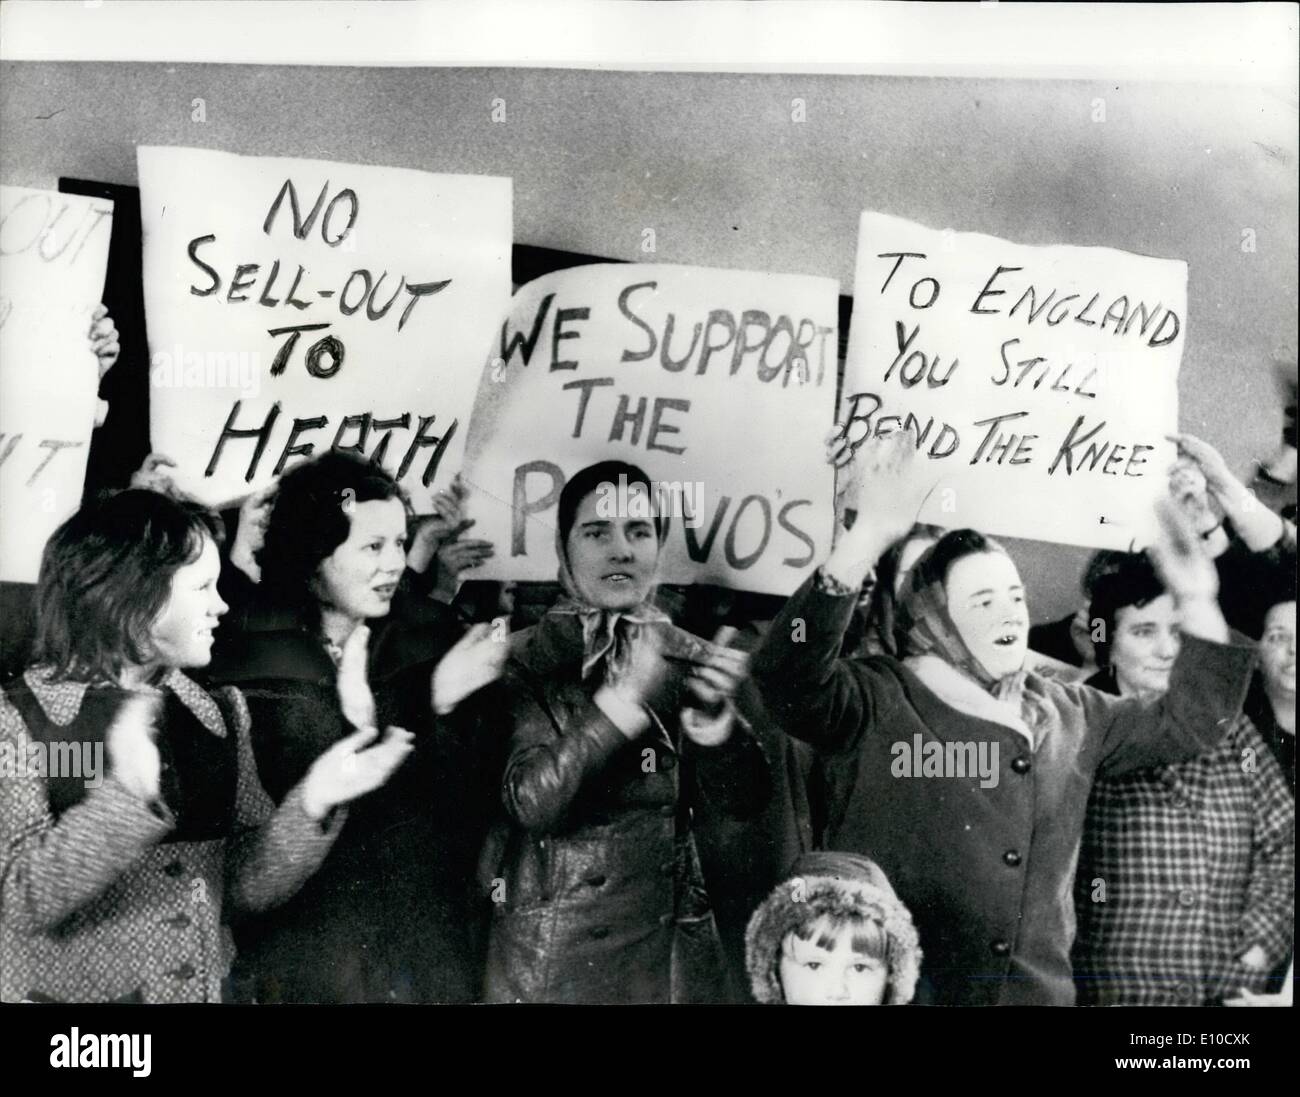 Apr. 04, 1972 - Women clash in Belfast: Roman Catholic women fought and screamed at each other in Belfast yesterday as supporters of the Provisional IRA broke up a meeting by the Women Together group, called to back the growing demand for an end to terrorism. Groups of youths and girls carrying placards supporting the Provisionals invaded the Holy Cross School Hall in Andersonstown, singing Republican songs and stamping. Outside, eggs were thrown Stock Photo